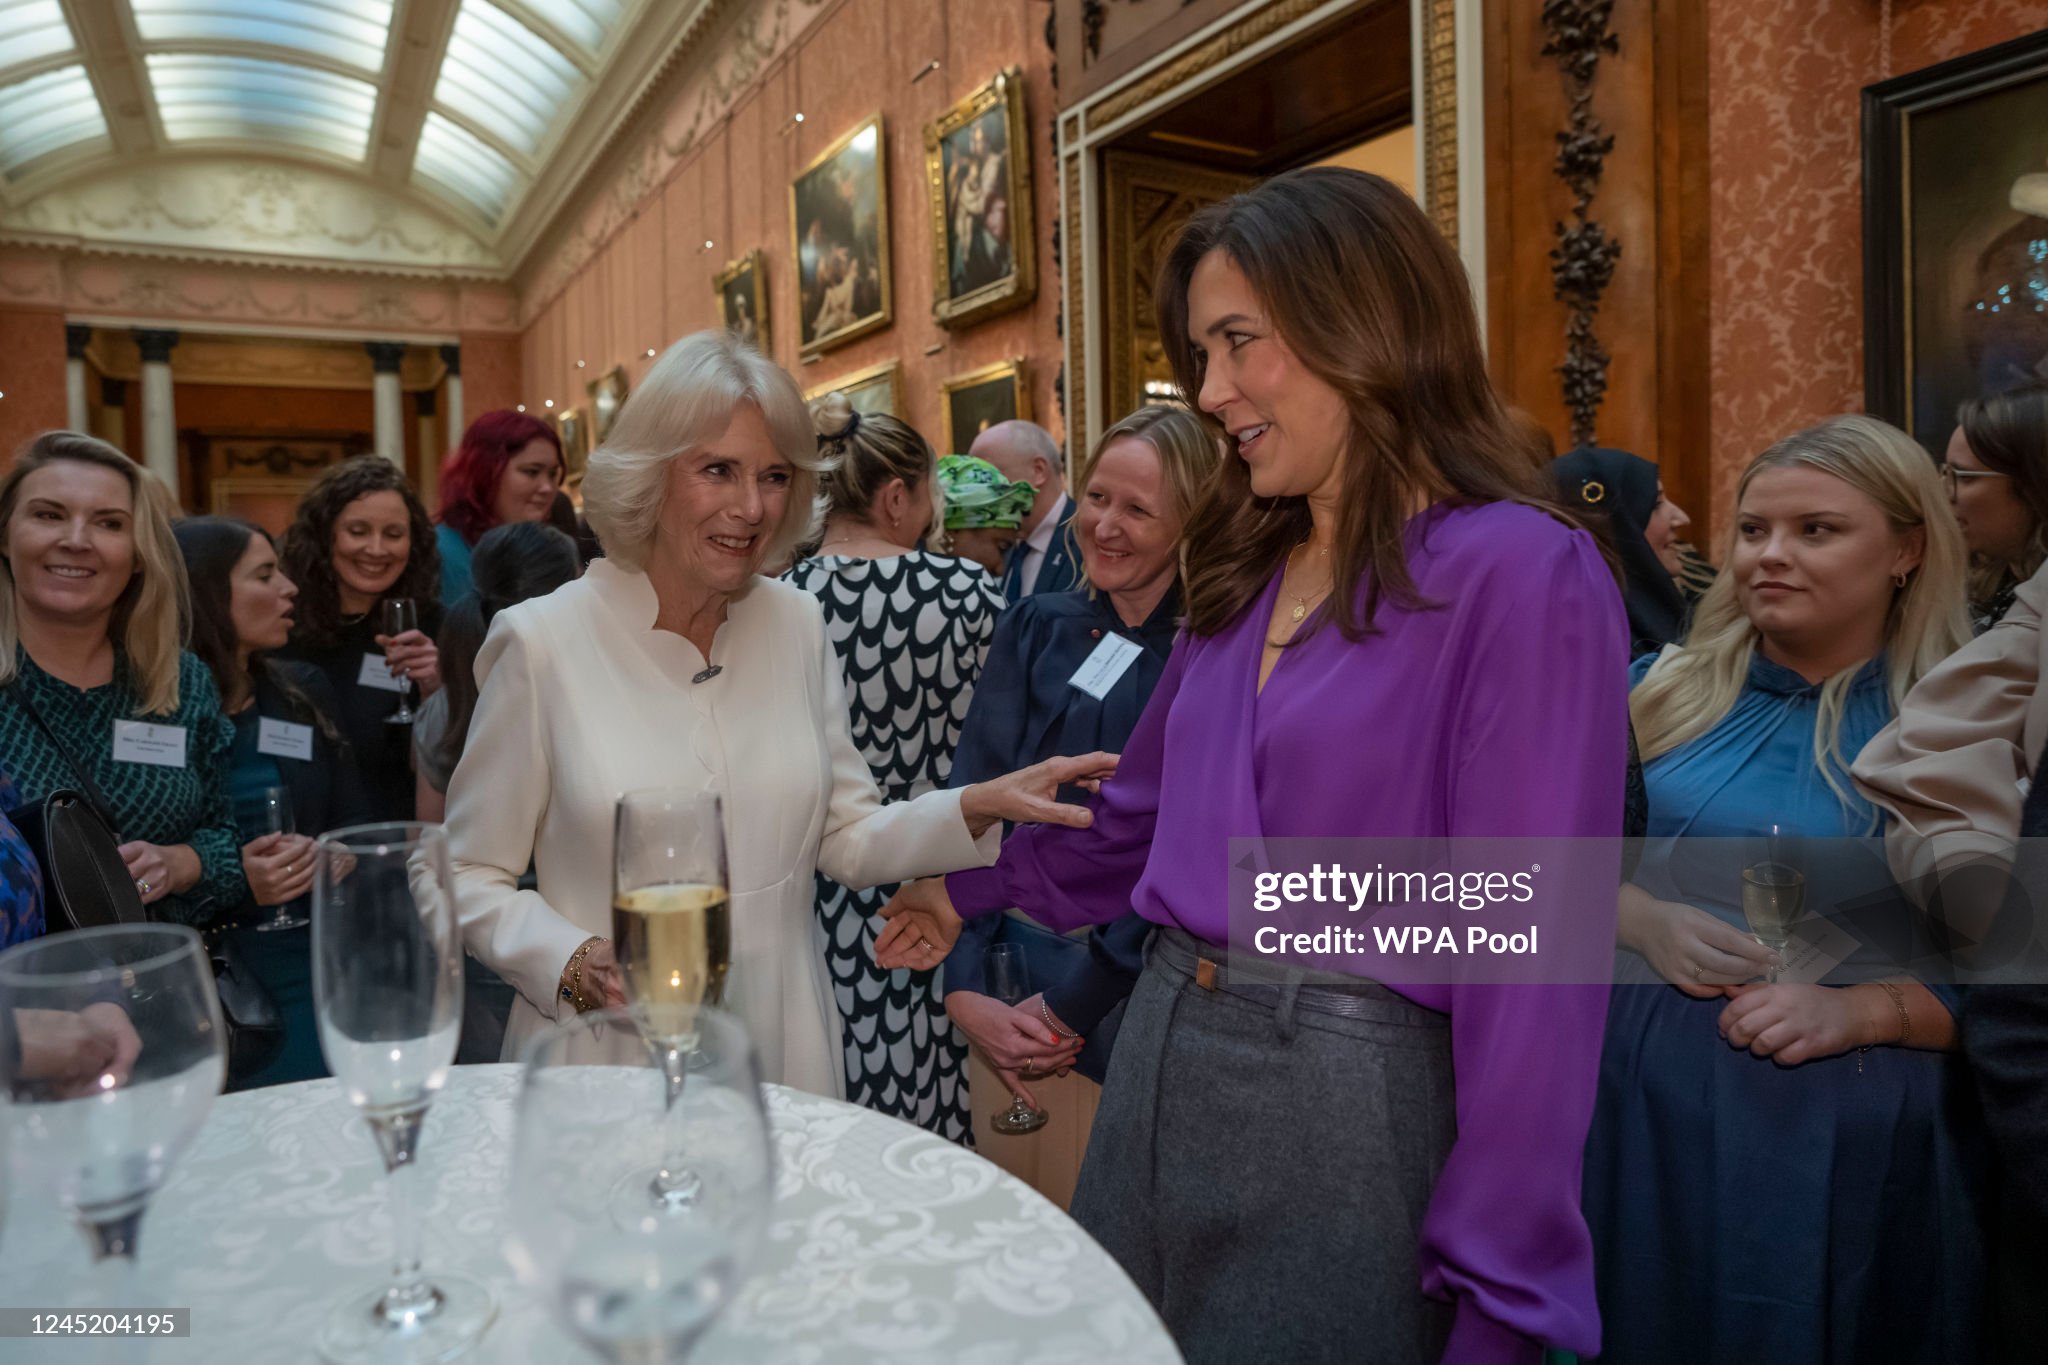 the-queen-consort-hosts-a-reception-to-raise-awareness-of-violence-against-women-and-girls.jpg?s=2048x2048&w=gi&k=20&c=x3LpMcZ2eB6a1iW4tustFP1CclFdIN8T1eXsIHBMJ24=